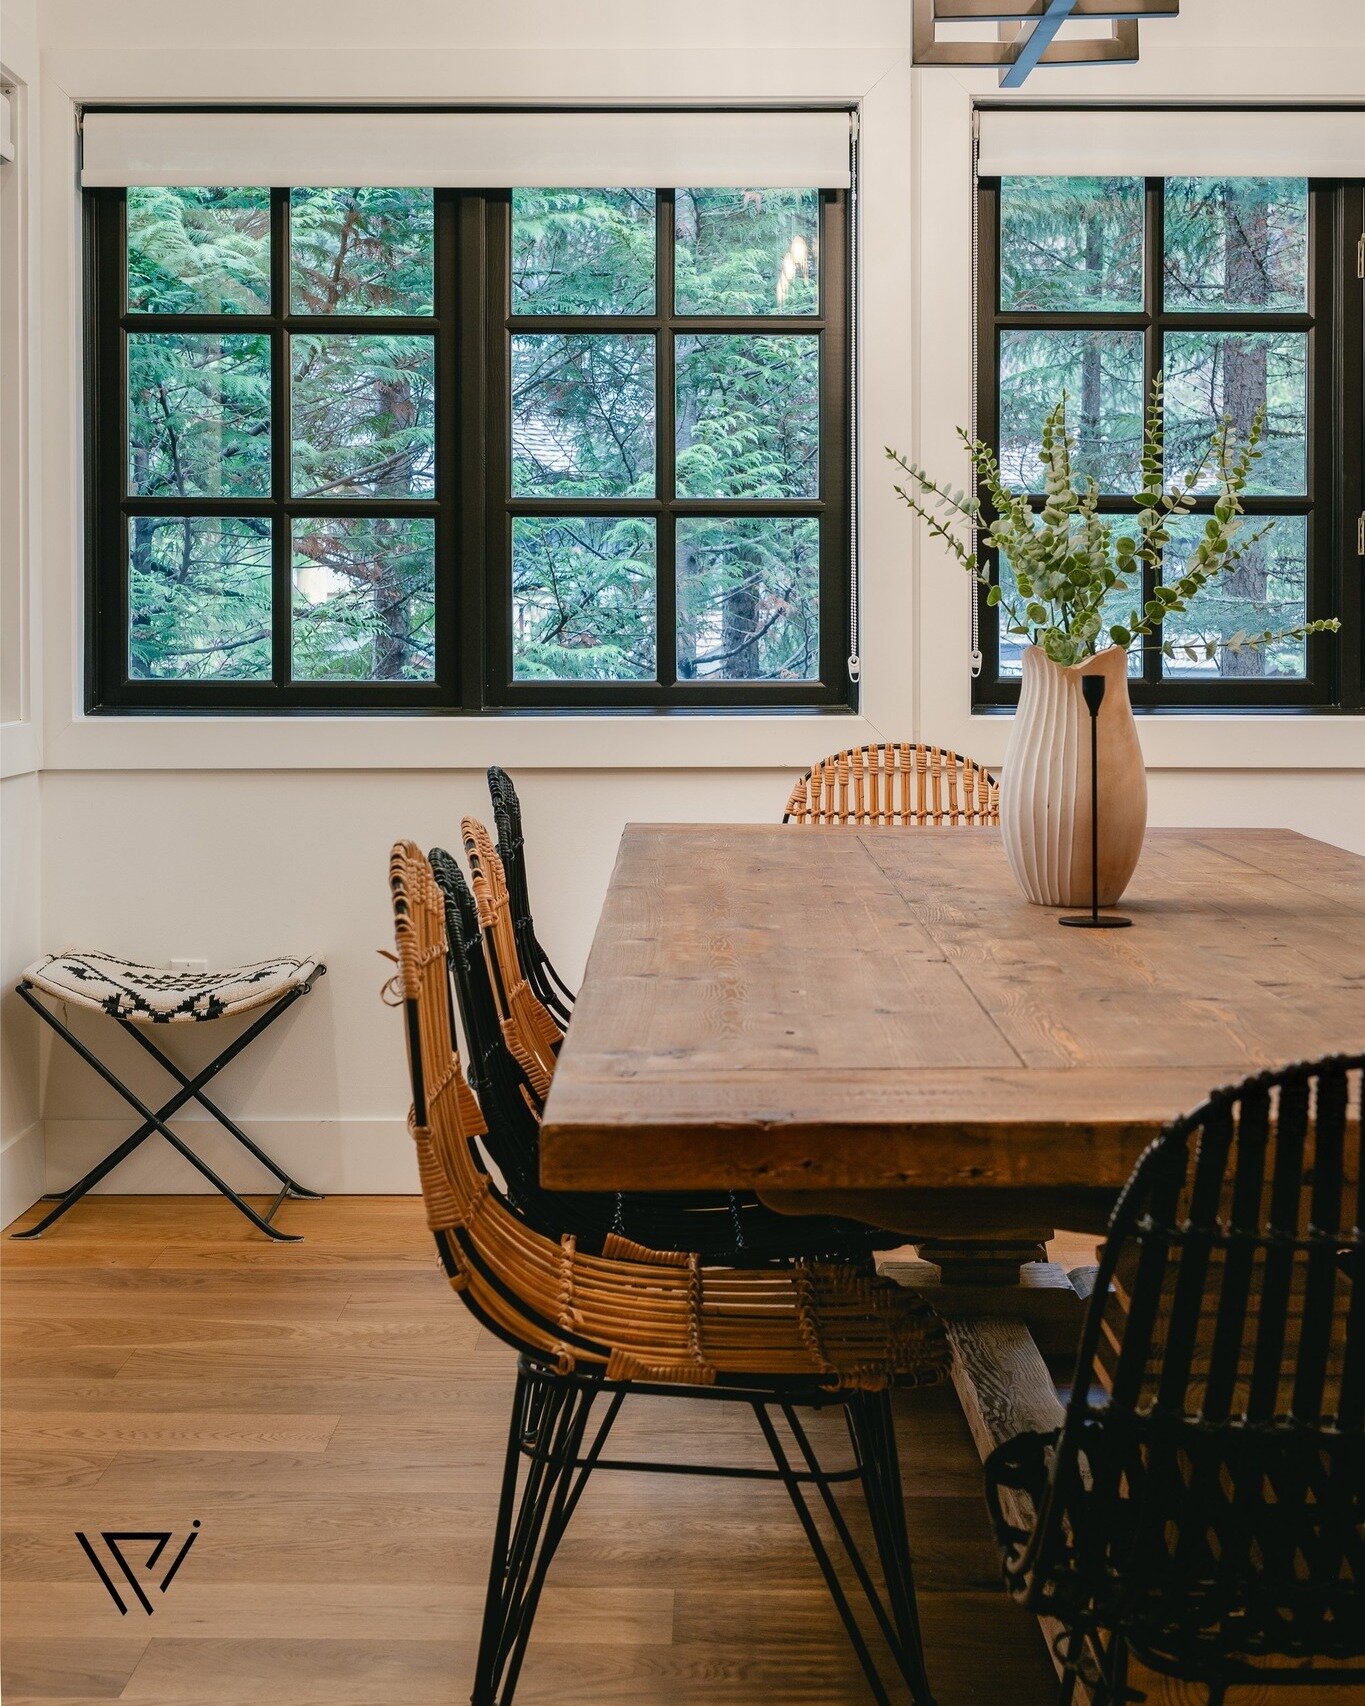 How often do you like to entertain?

When it comes to designing a space that suits your daily needs, the concept needs to start there; how do you live your life at home? 

Understanding your needs guides a livable design that you can enjoy as you go 